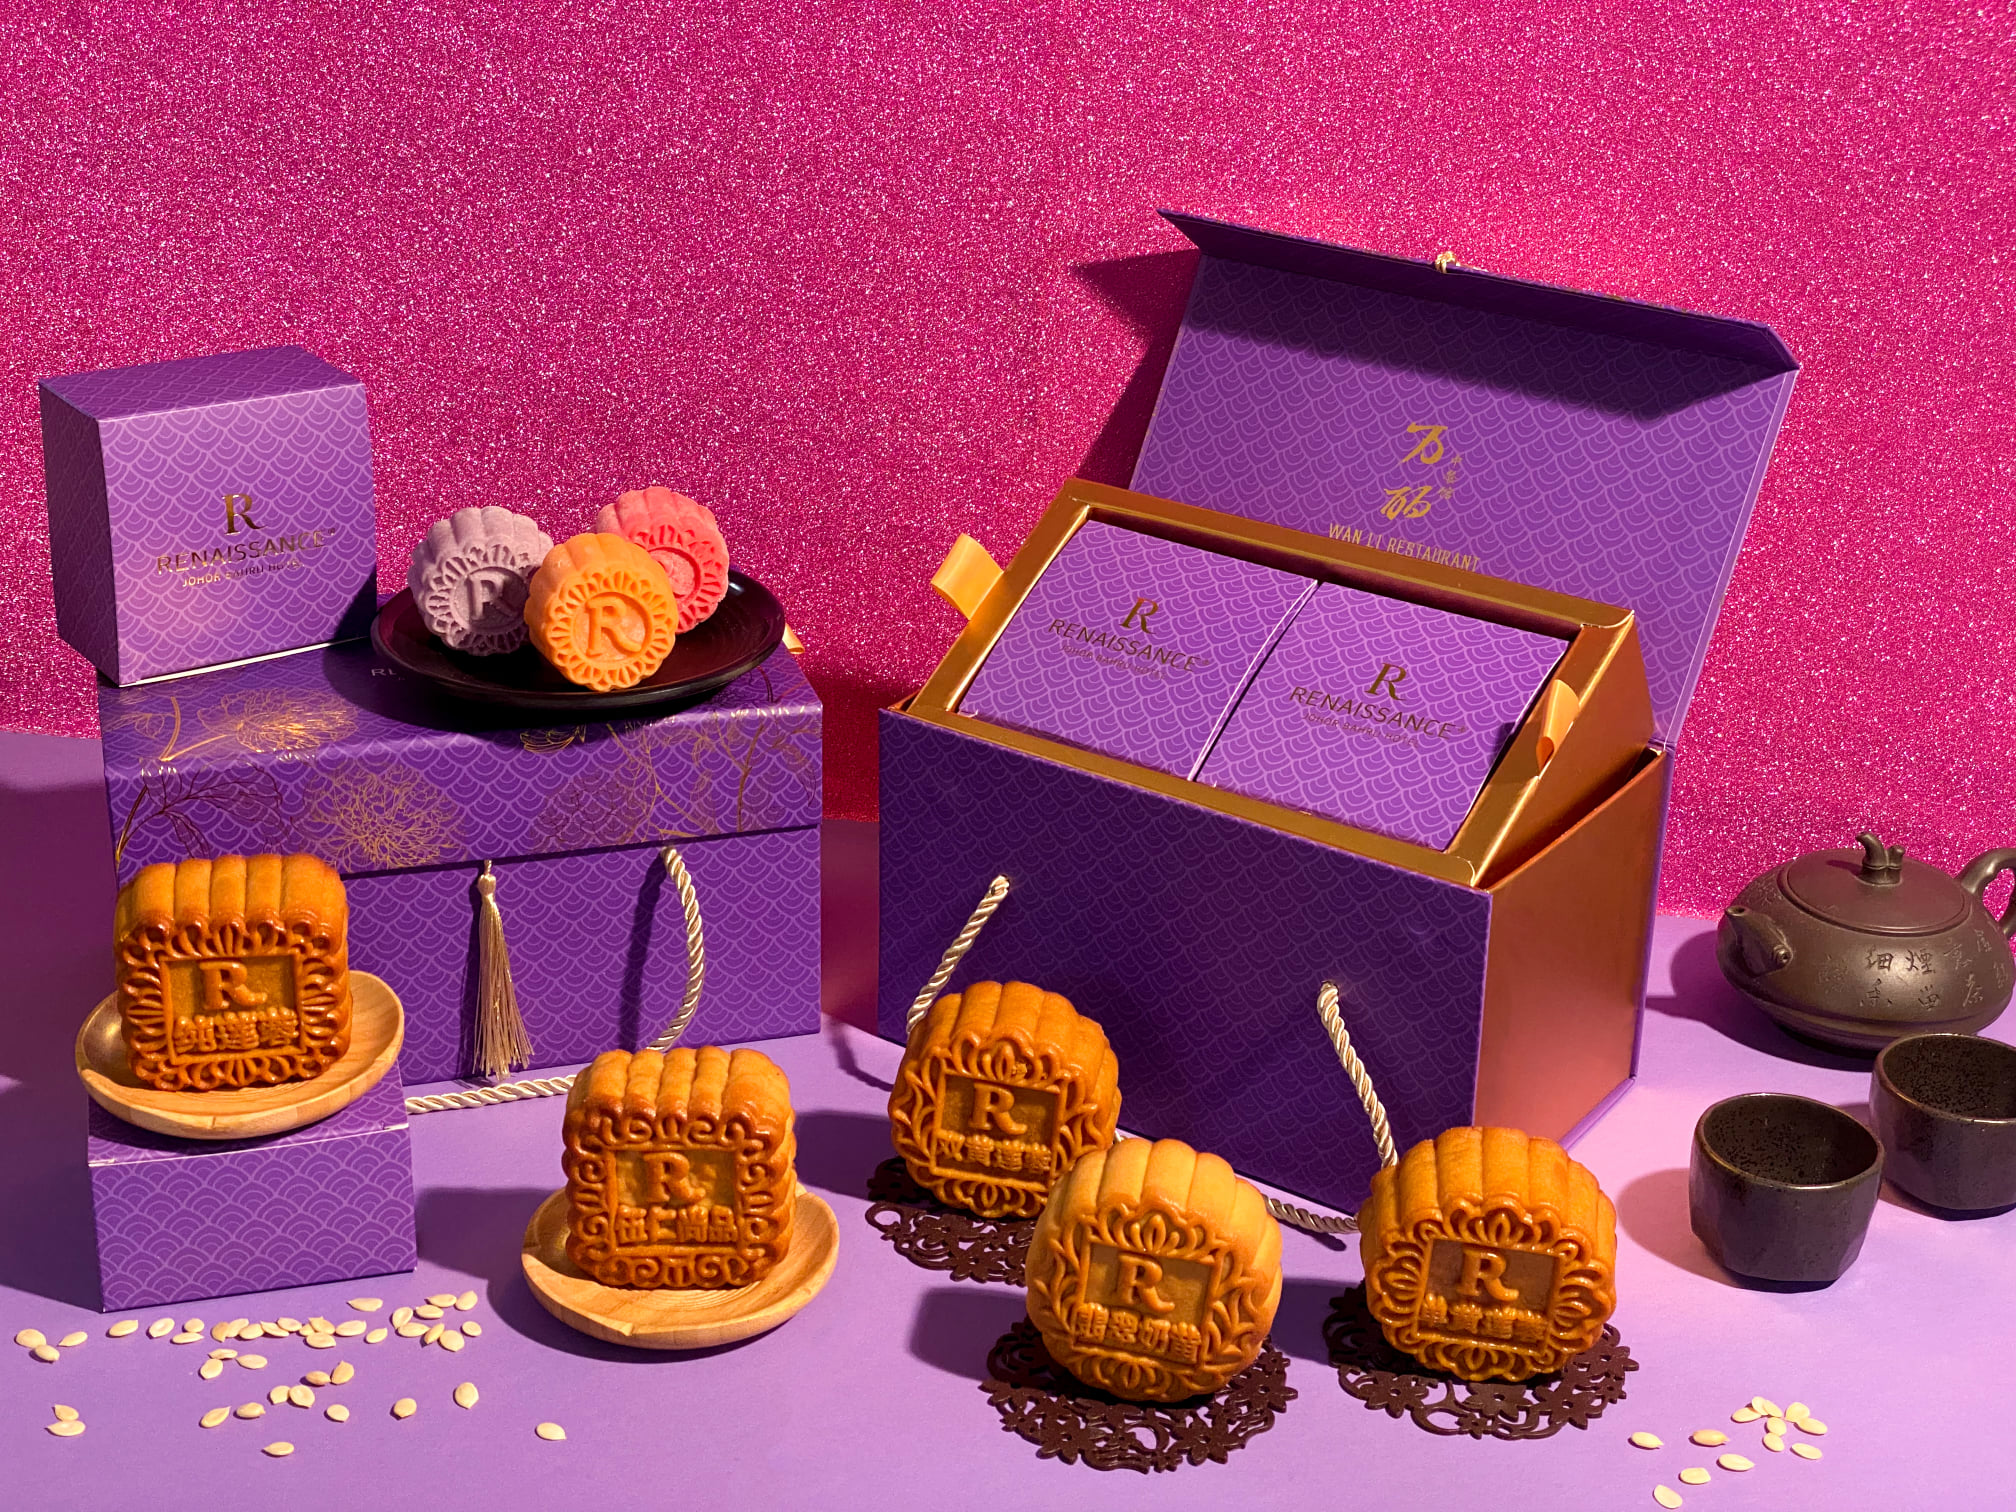 Go Over The Moon With These Halal Mooncakes From Marriott Bonvoy Hotels And Resorts